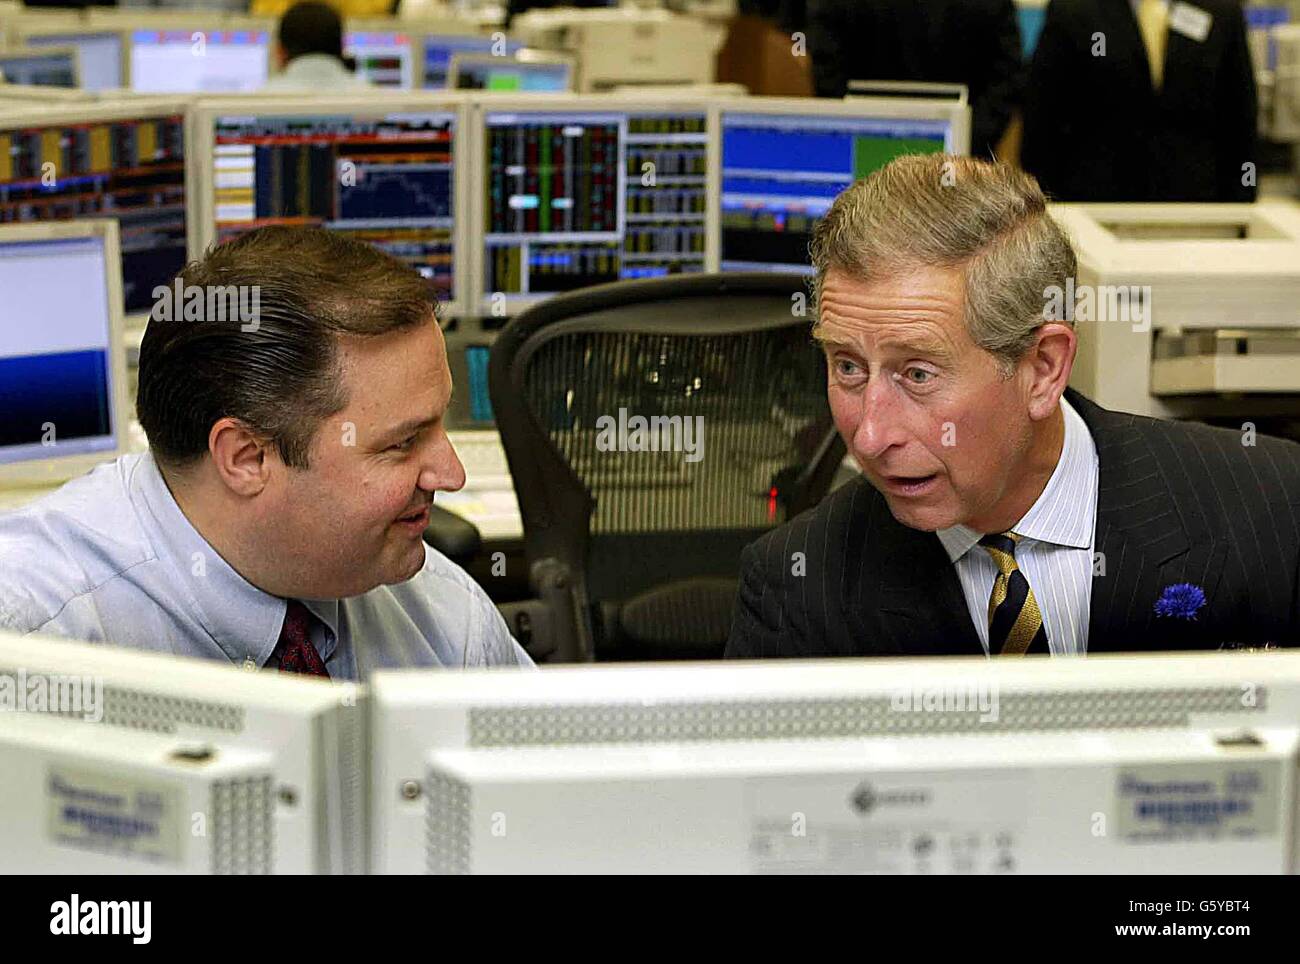 The Prince of Wales talks with equities trader Grant Turner during a visit to the trading floors of the Merrill Lynch Financial Centre, in the City. Stock Photo